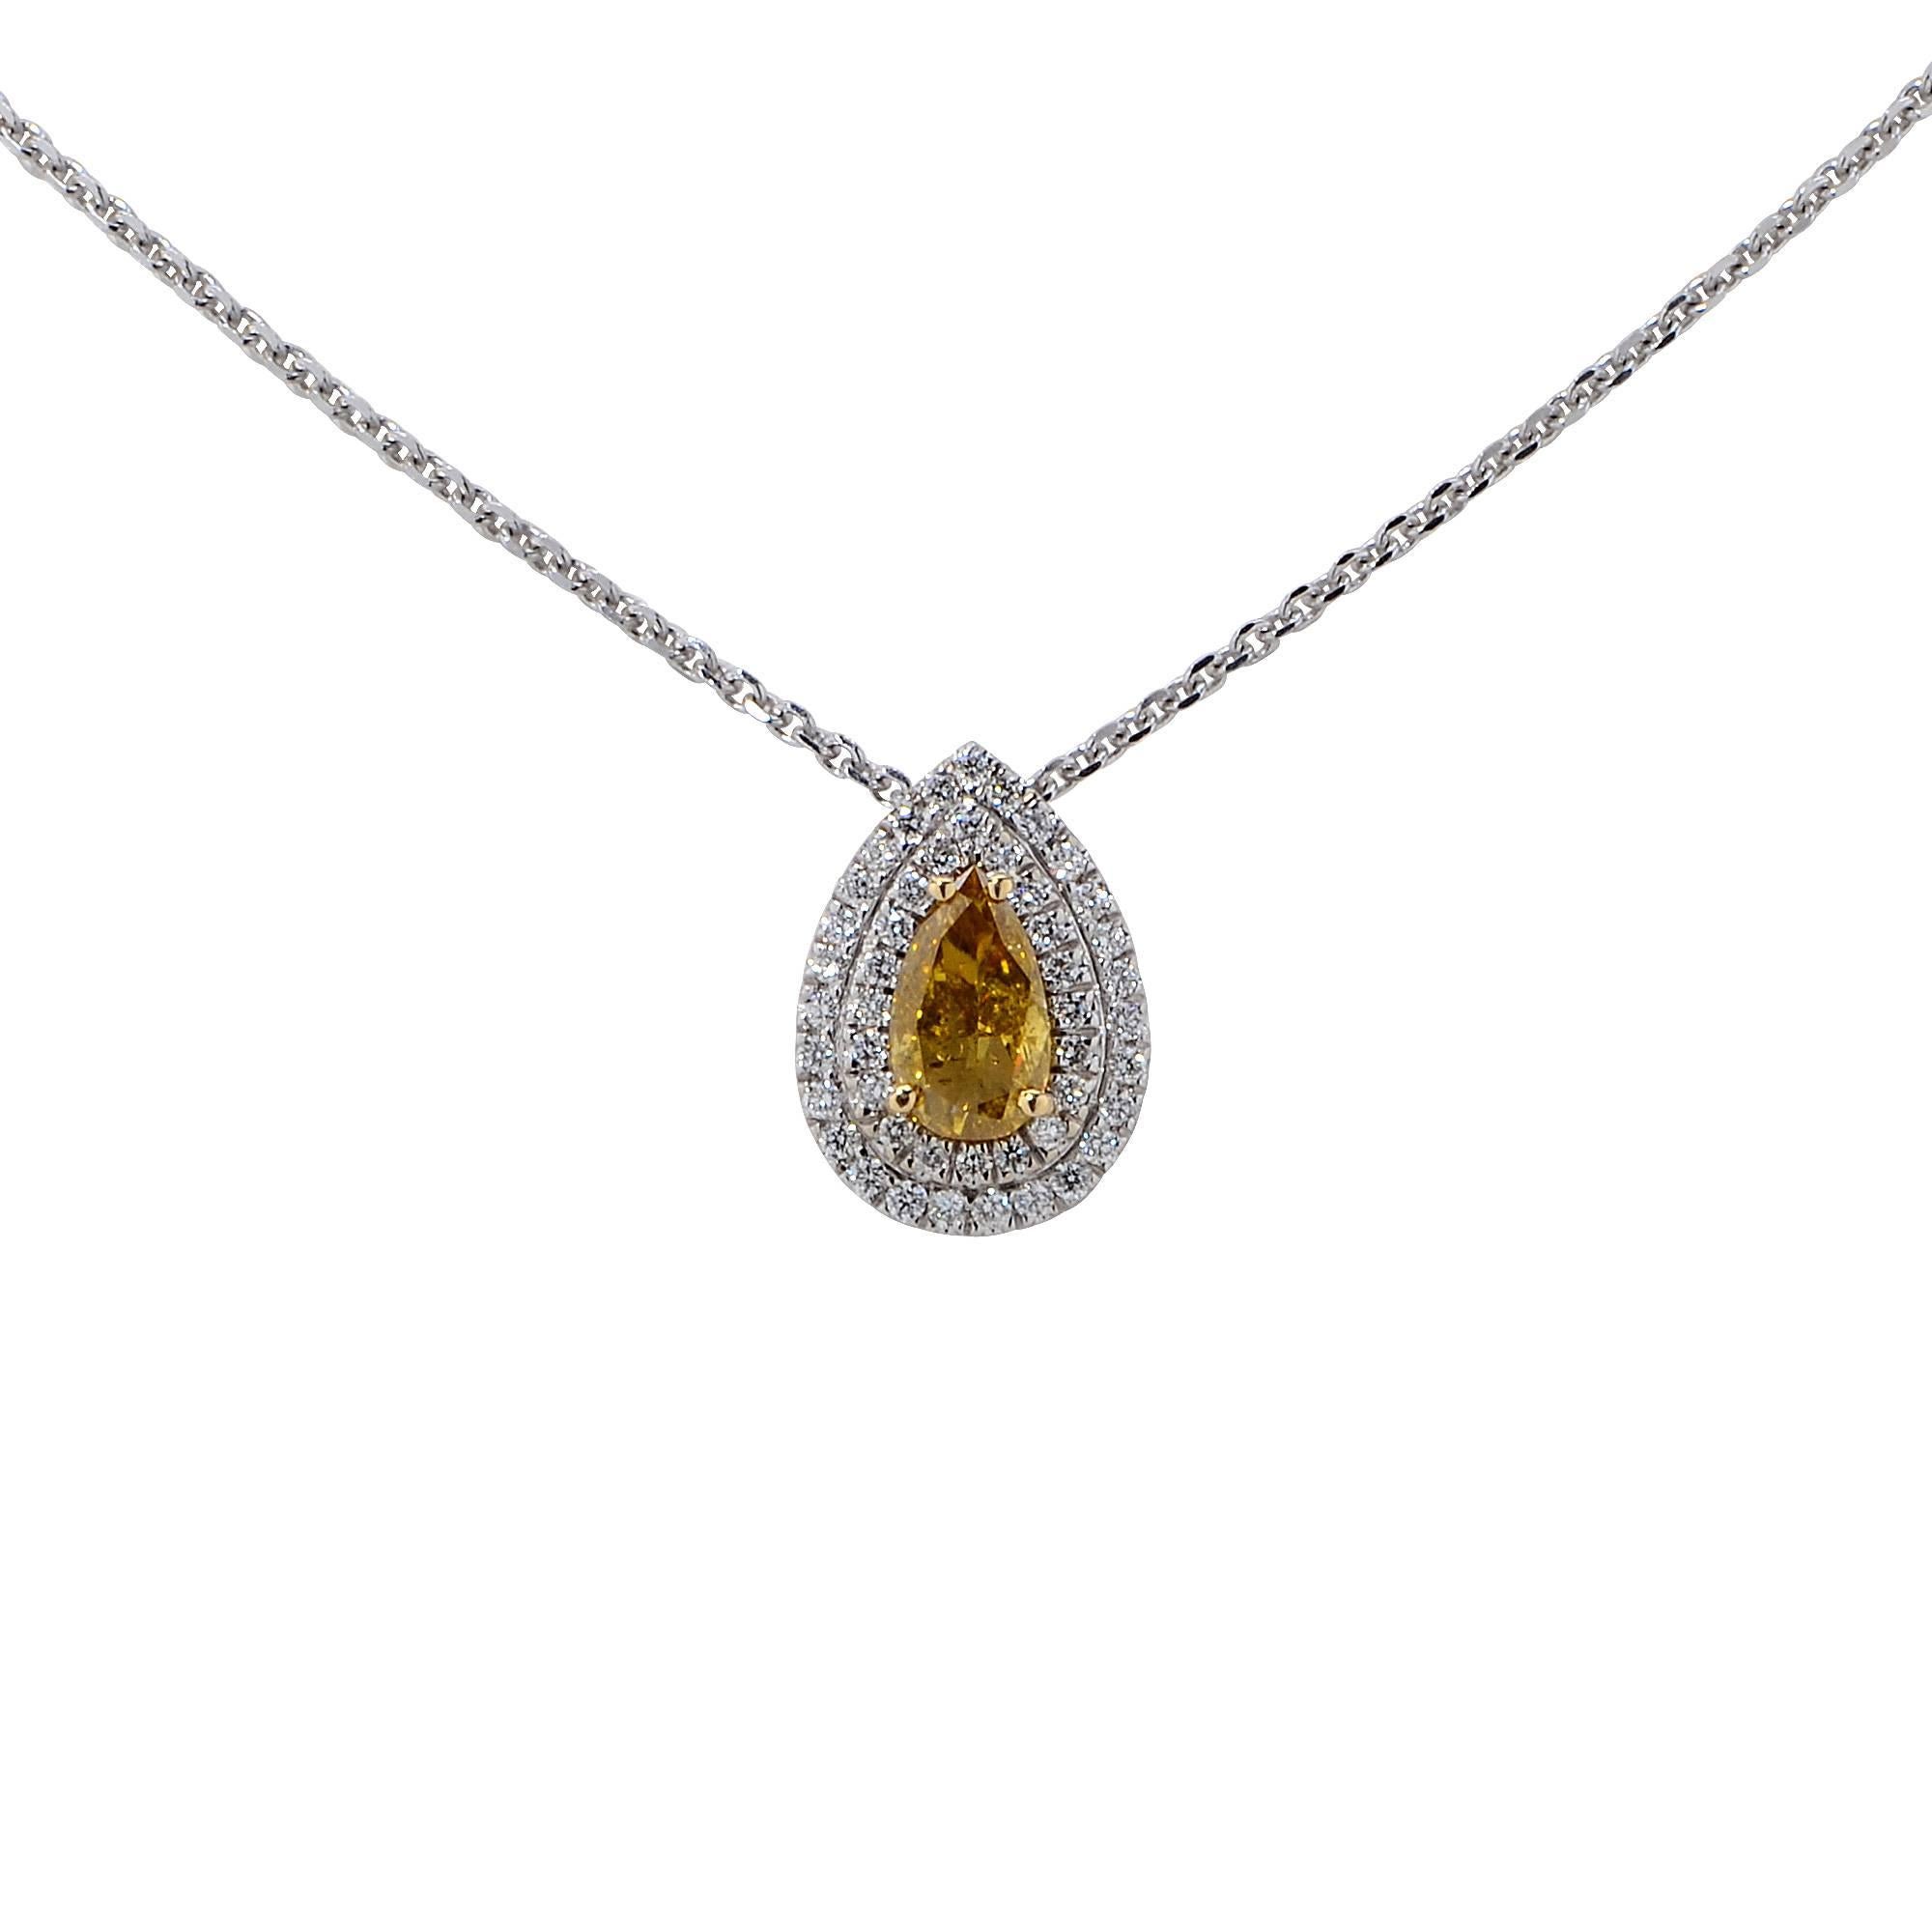 18 Karat White Gold Custom-Made Necklace Featuring a 1.02 Carat Fancy Deep Brownish Yellow Pear Shape Diamond Accented by .34 Carats of Round Brilliant Cut Diamonds, G Color, VS Clarity.

This Necklace is Accompanied by a GIA Report as well as a